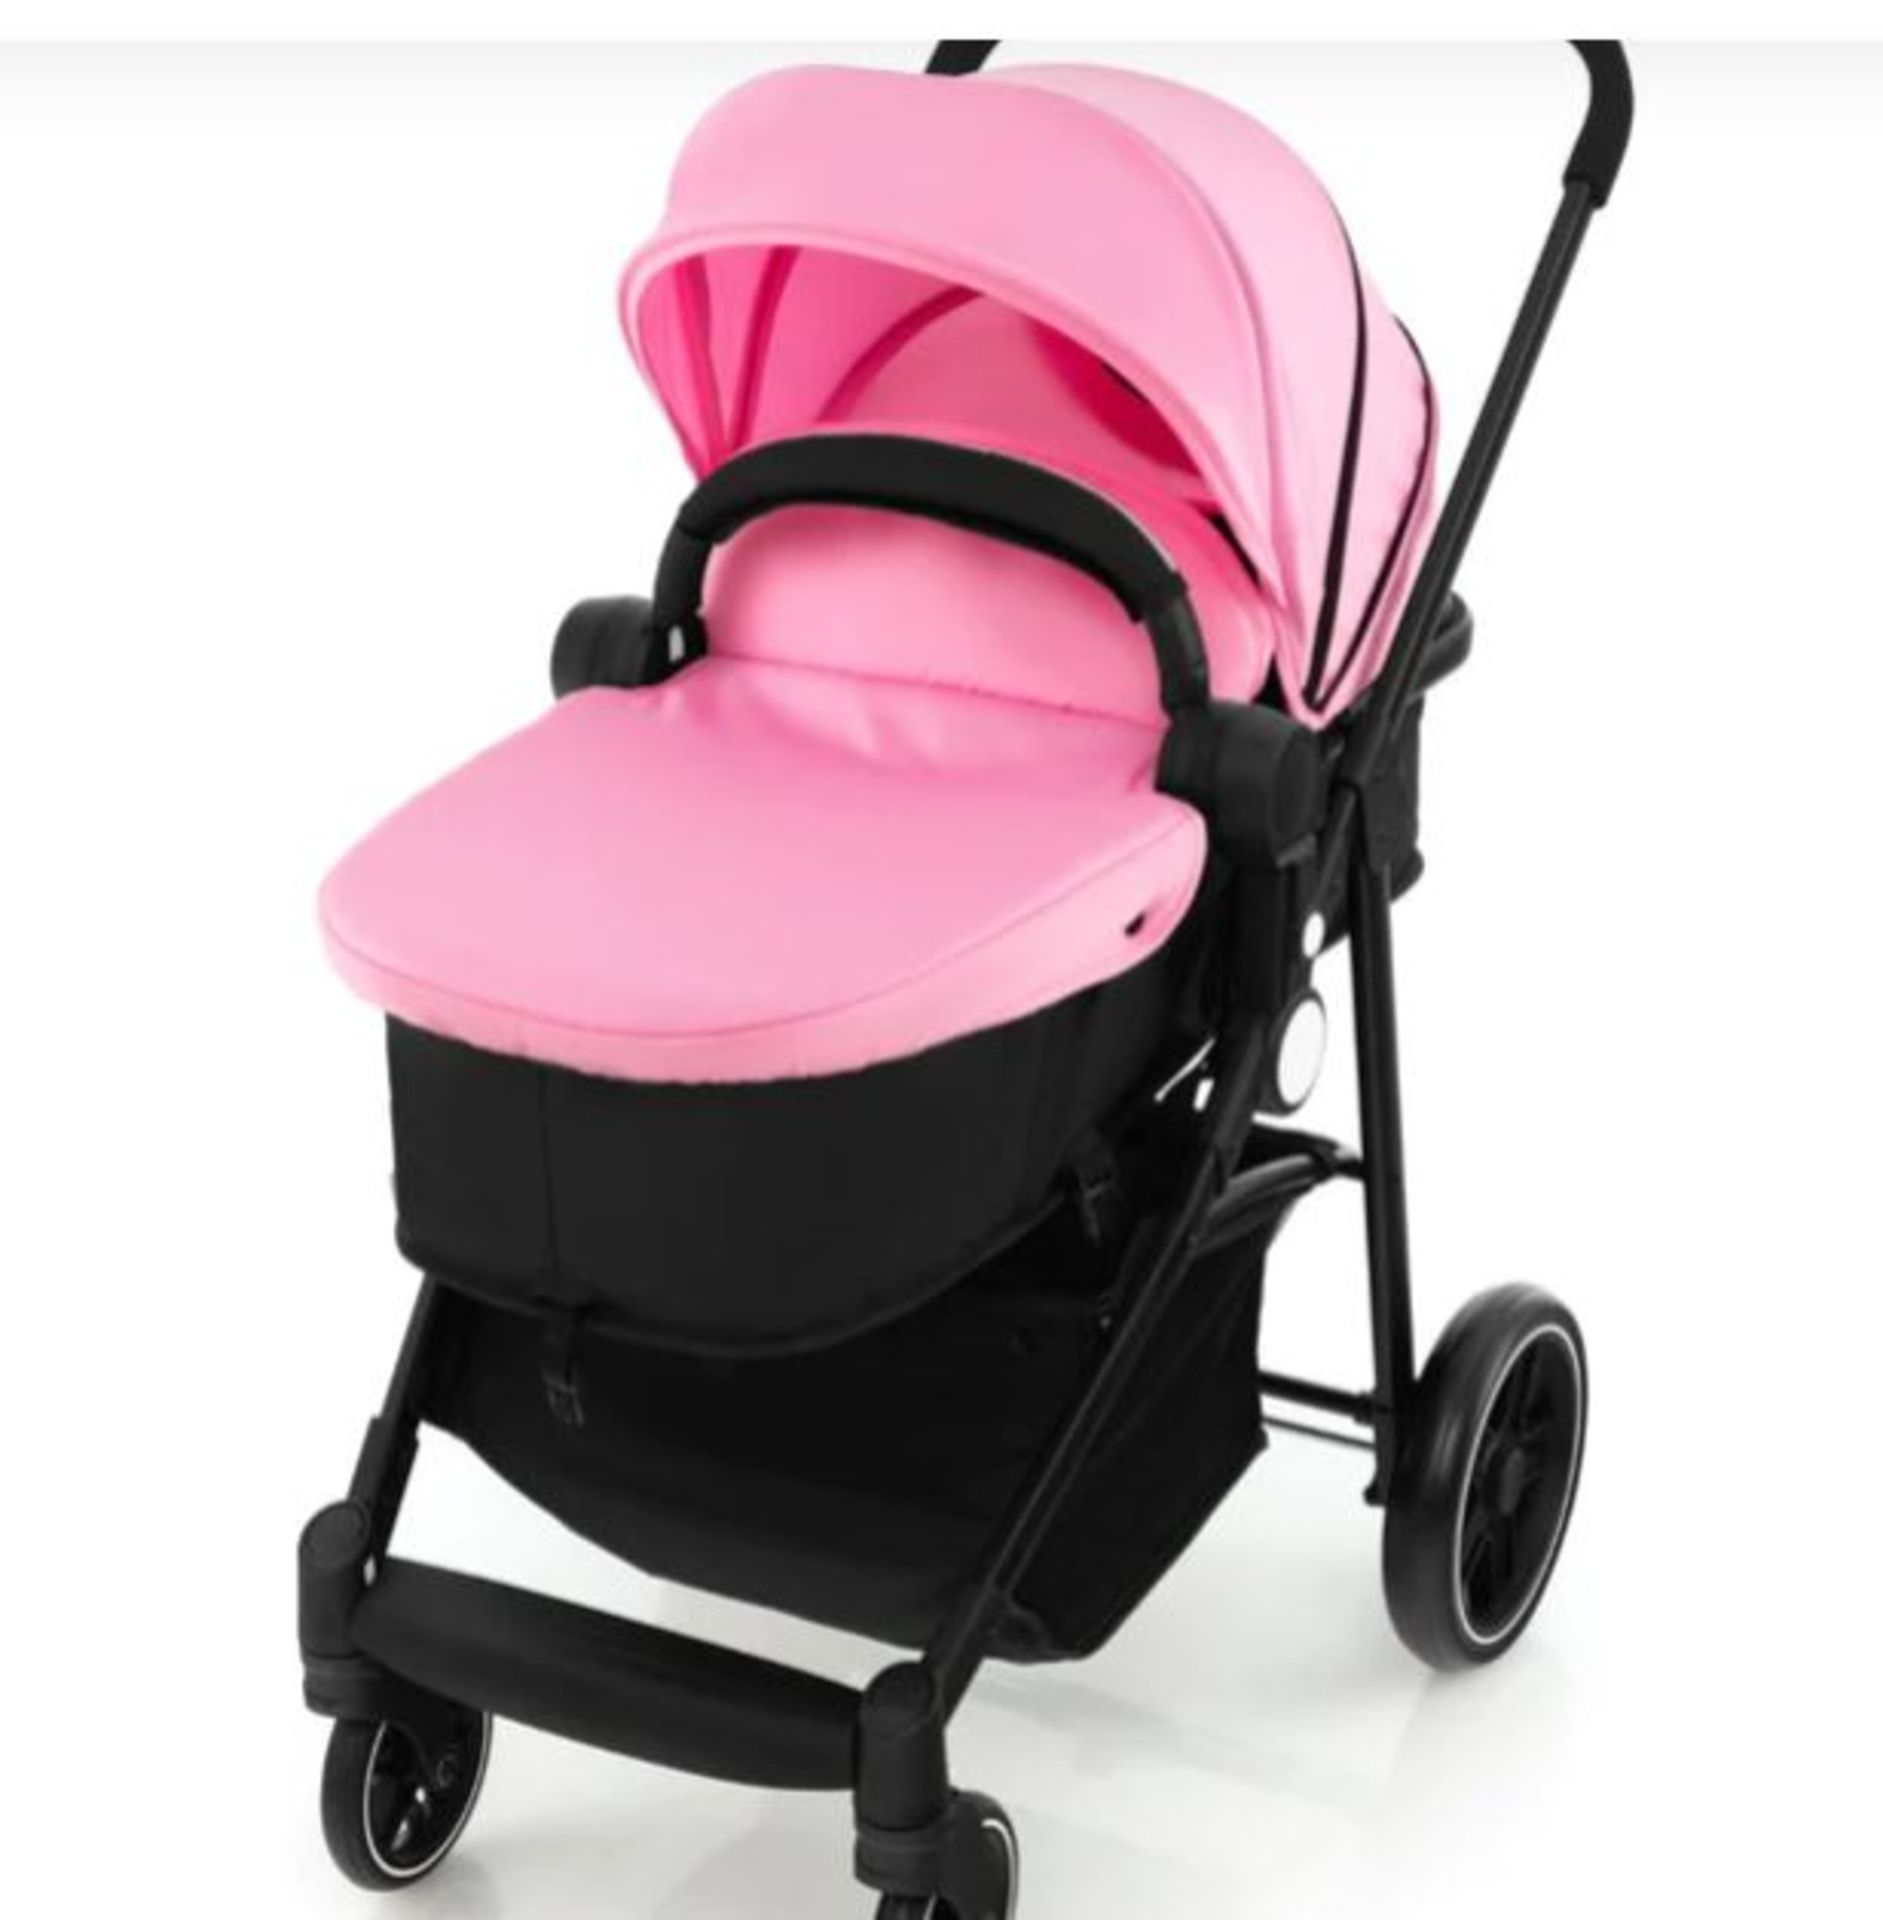 2 IN 1 HIGH LANDSCAPE STROLLER WITH REVERSIBLE SEAT AND ADJUSTABLE BACKREST AND CANOPY-PINK. -